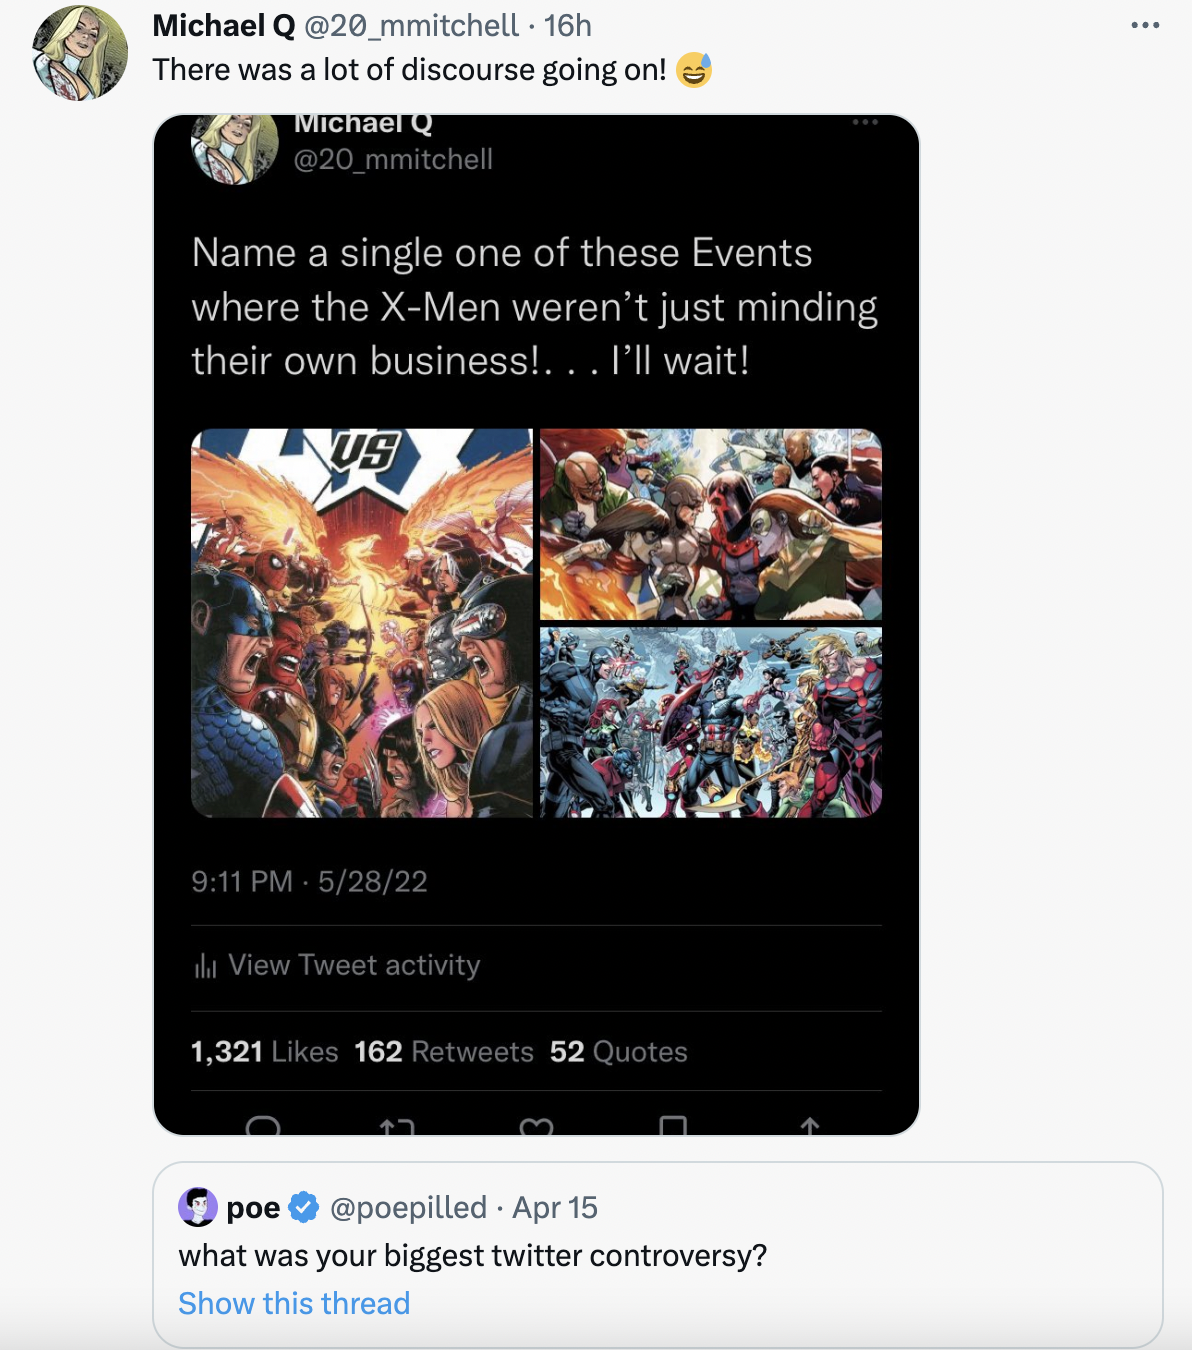 controversial tweets - multimedia -There was a lot of discourse going on! Michael Q Name a single one of these Events where the XMen weren't just minding their own business!... I'll wait!